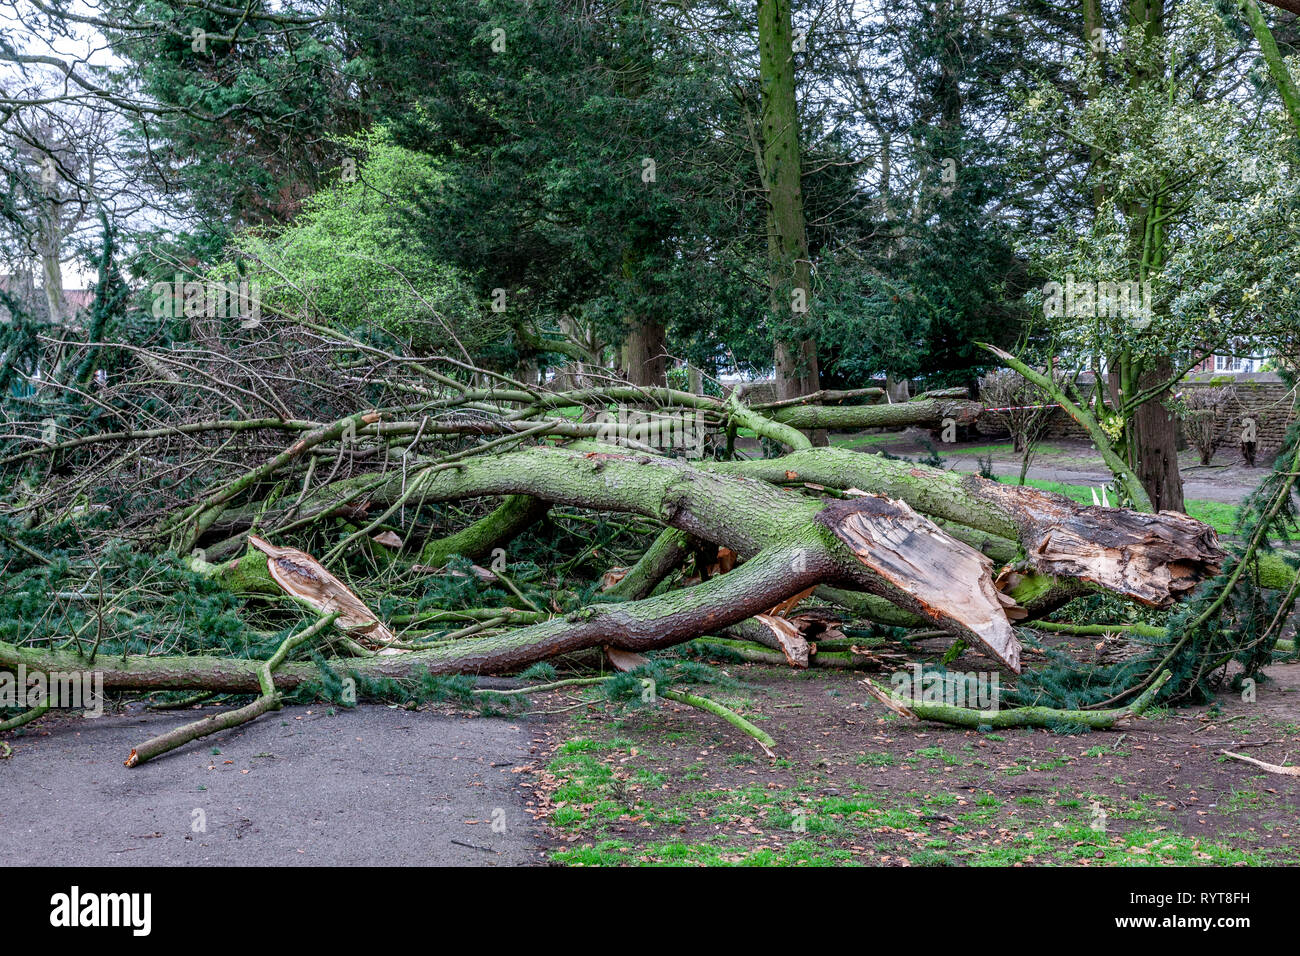 Northampton. U.K. 15th March 2019. Gale force winds overnight bring down some heavy branches from trees in Abington Park.   Credit: Keith J Smith./Alamy Live News Stock Photo